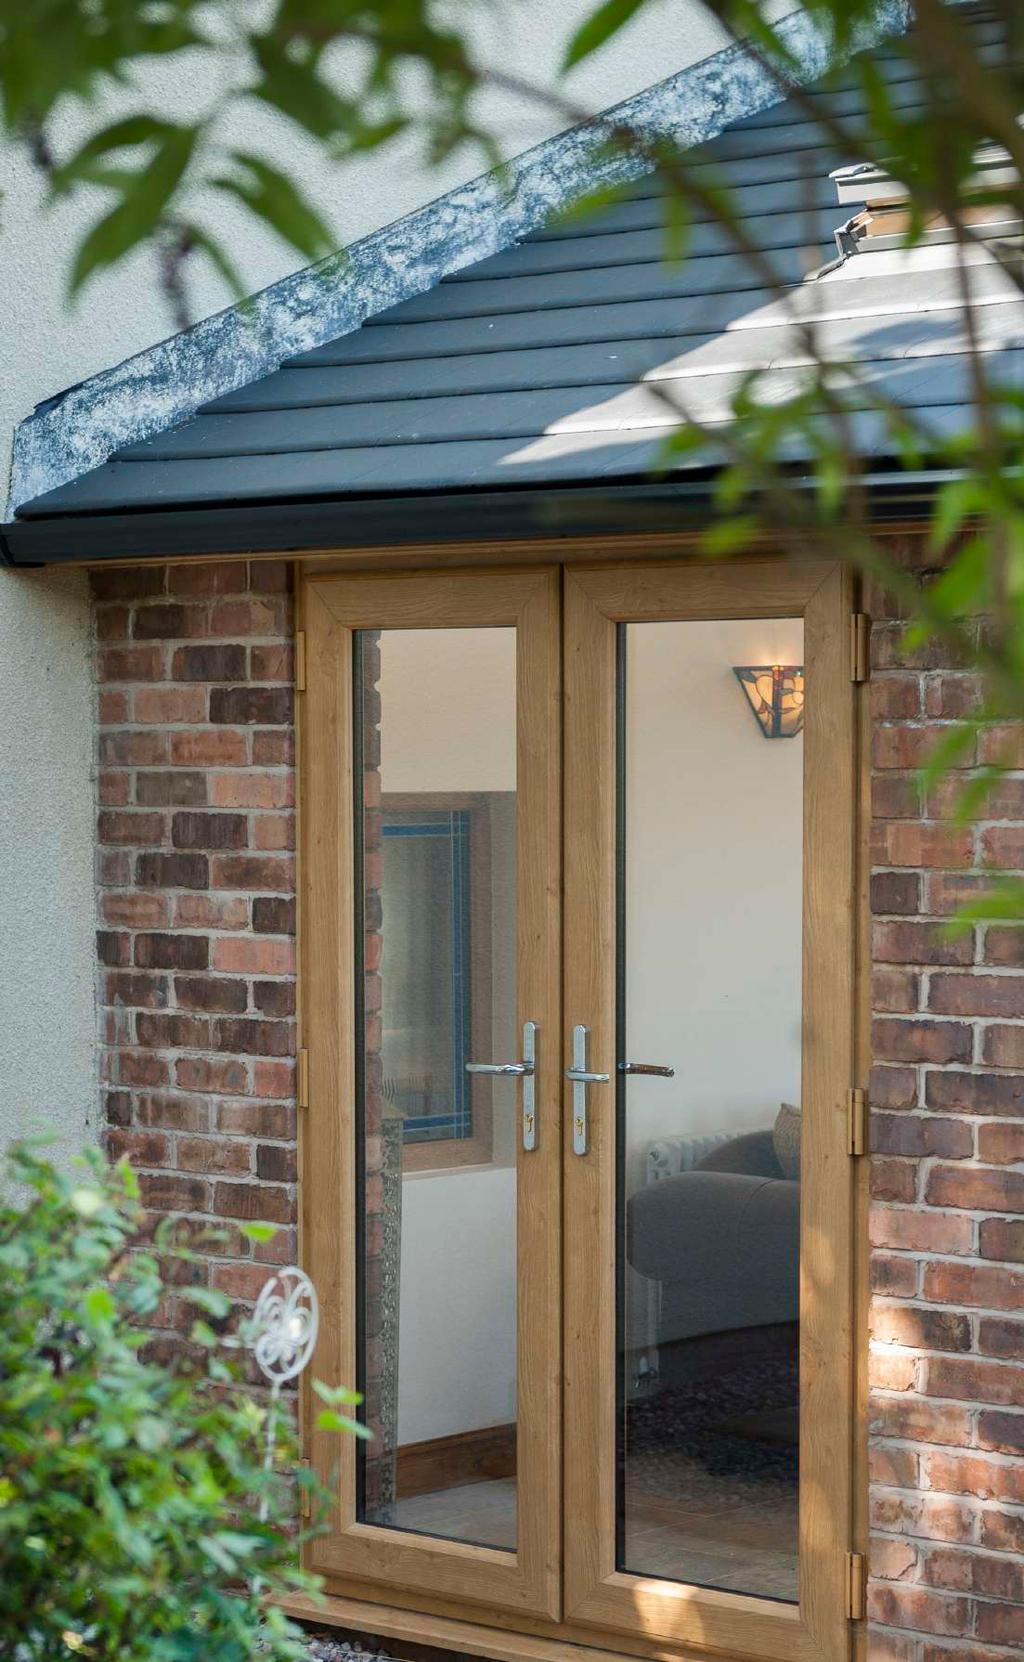 2 3 ABOUT US Prefix Systems was established in 1996 and has grown to be the UK s largest independent conservatory roof fabricators, offering a wide variety of Conservatory roof & glazing solutions to